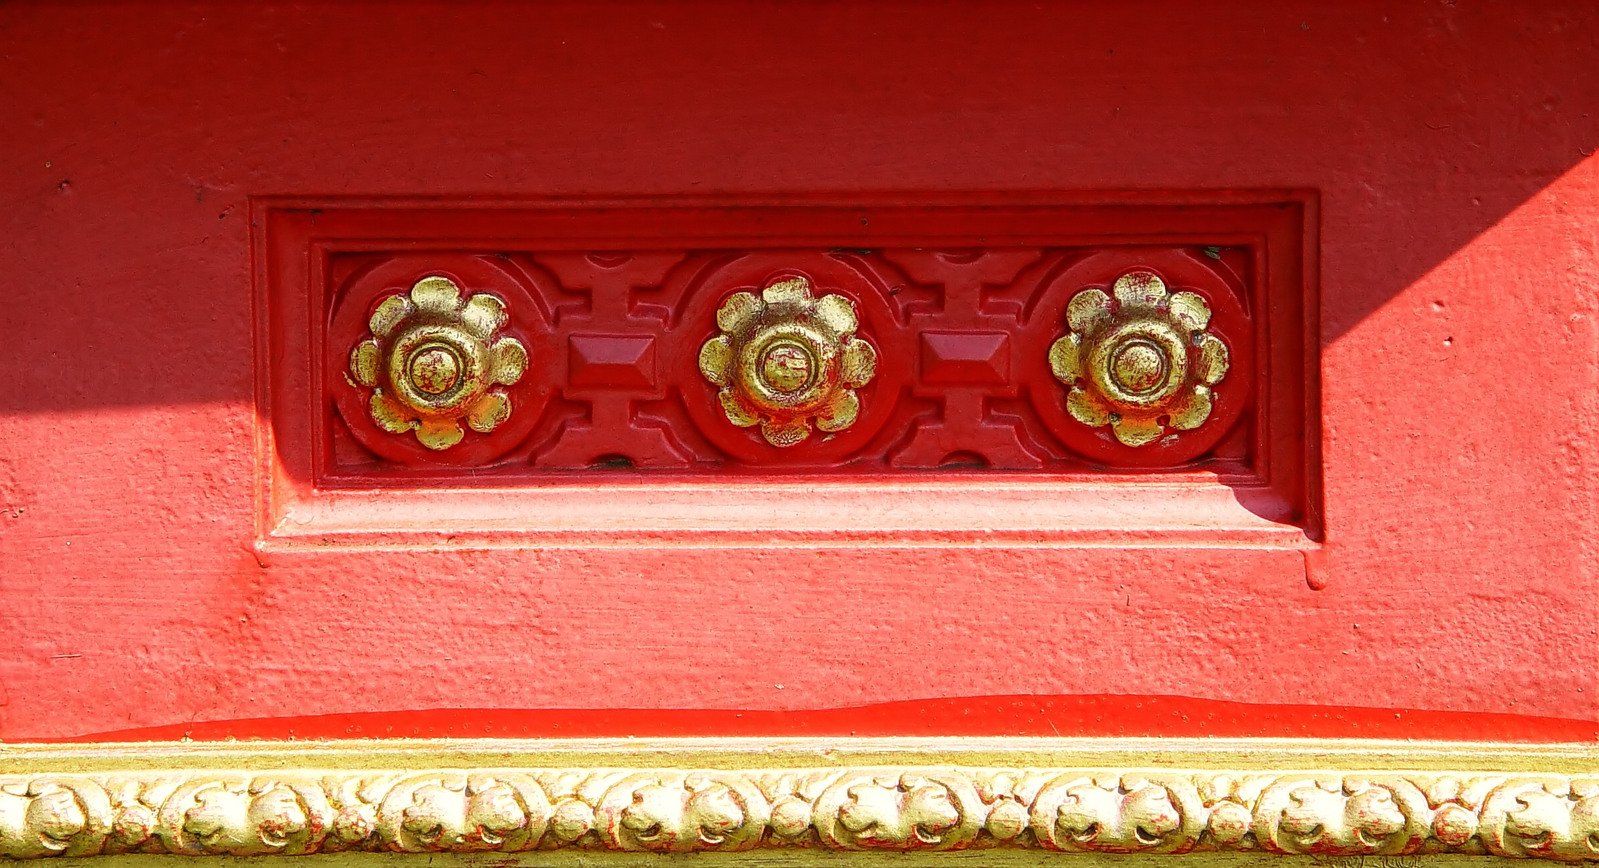 the gold details are in the red building